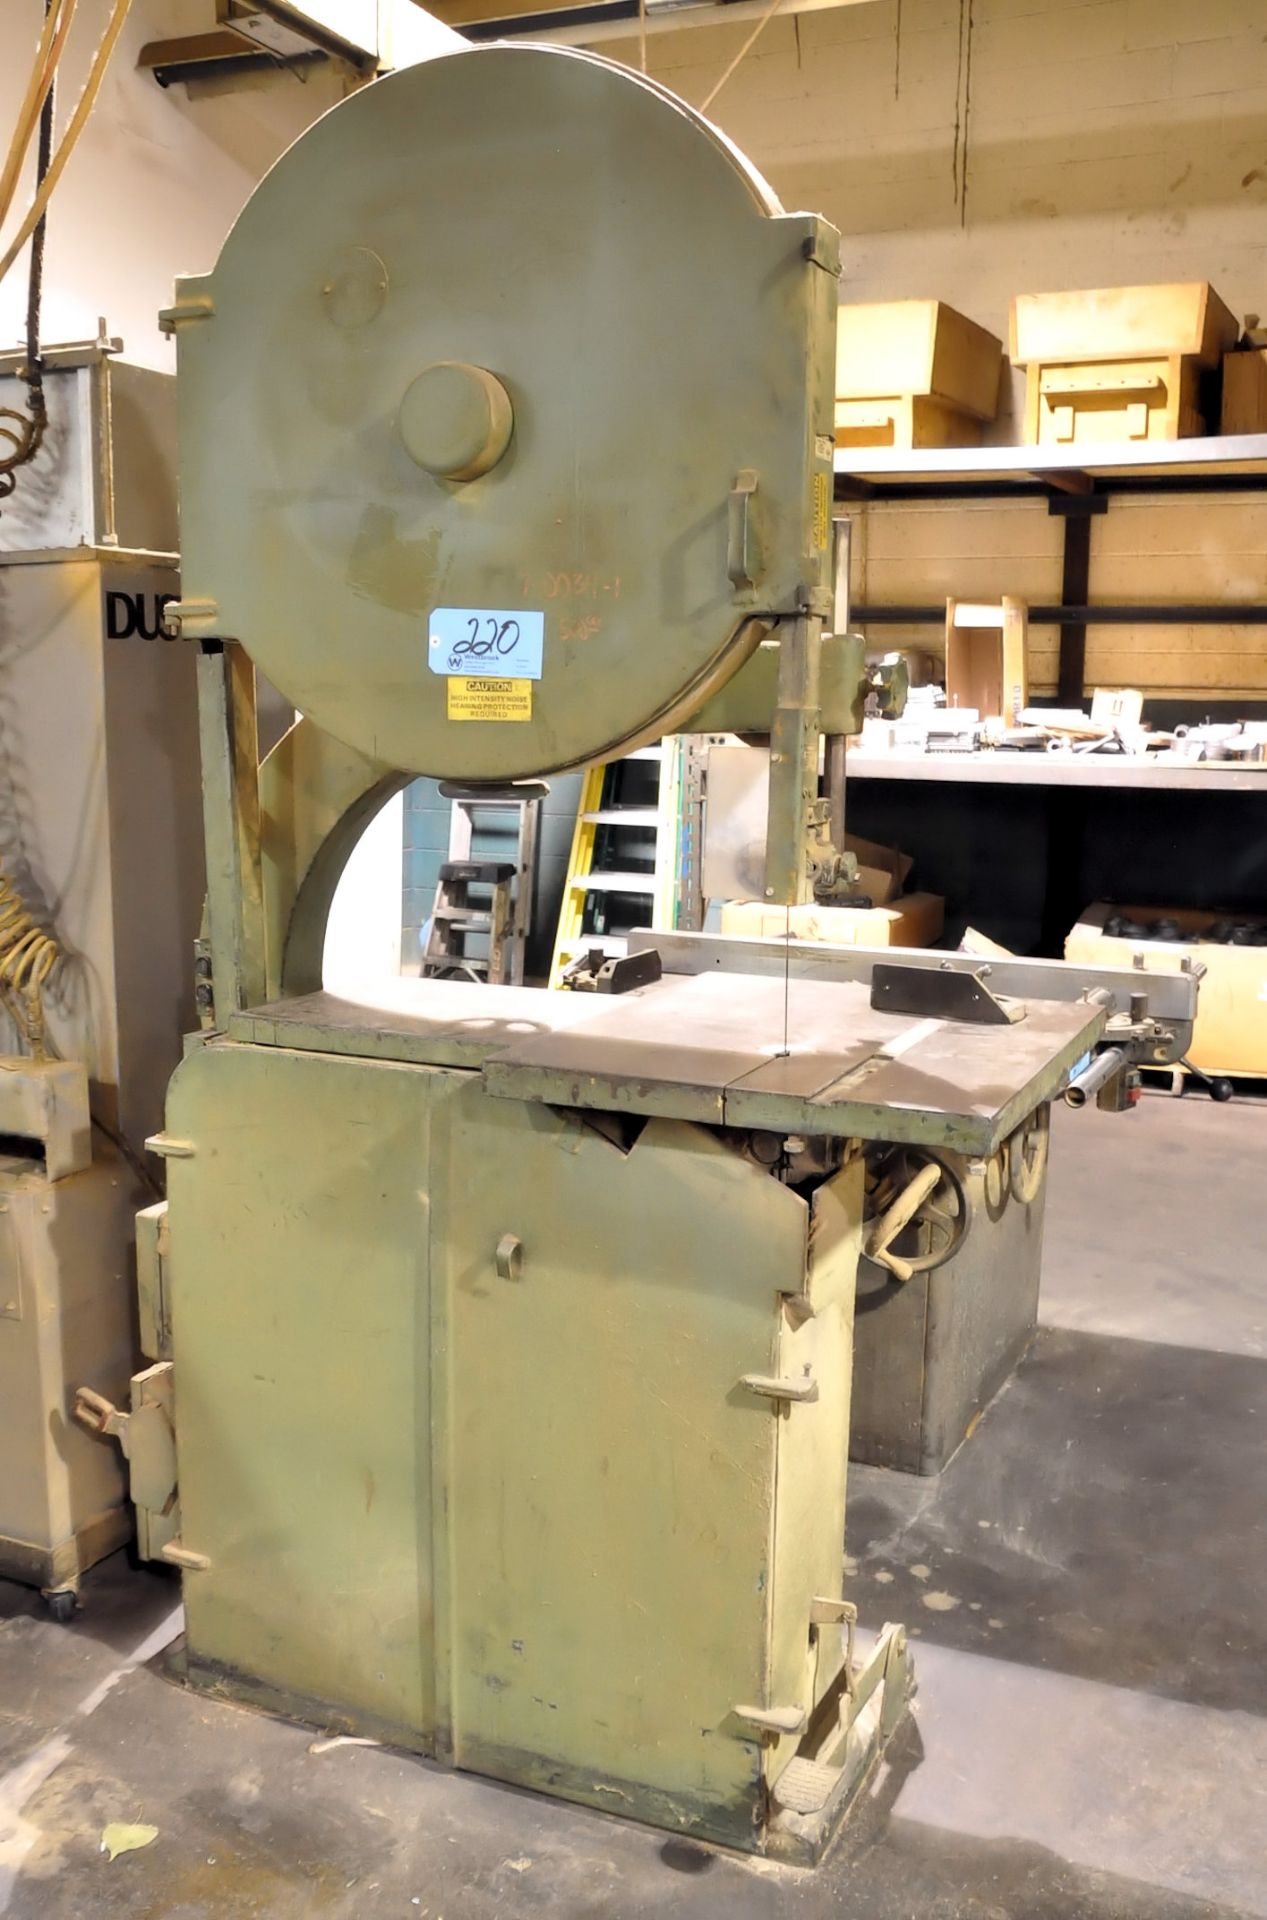 Rockwell 30" Vertical Contour Wood Cutting Band Saw, 24" x 28" Work Surface, 3-PH